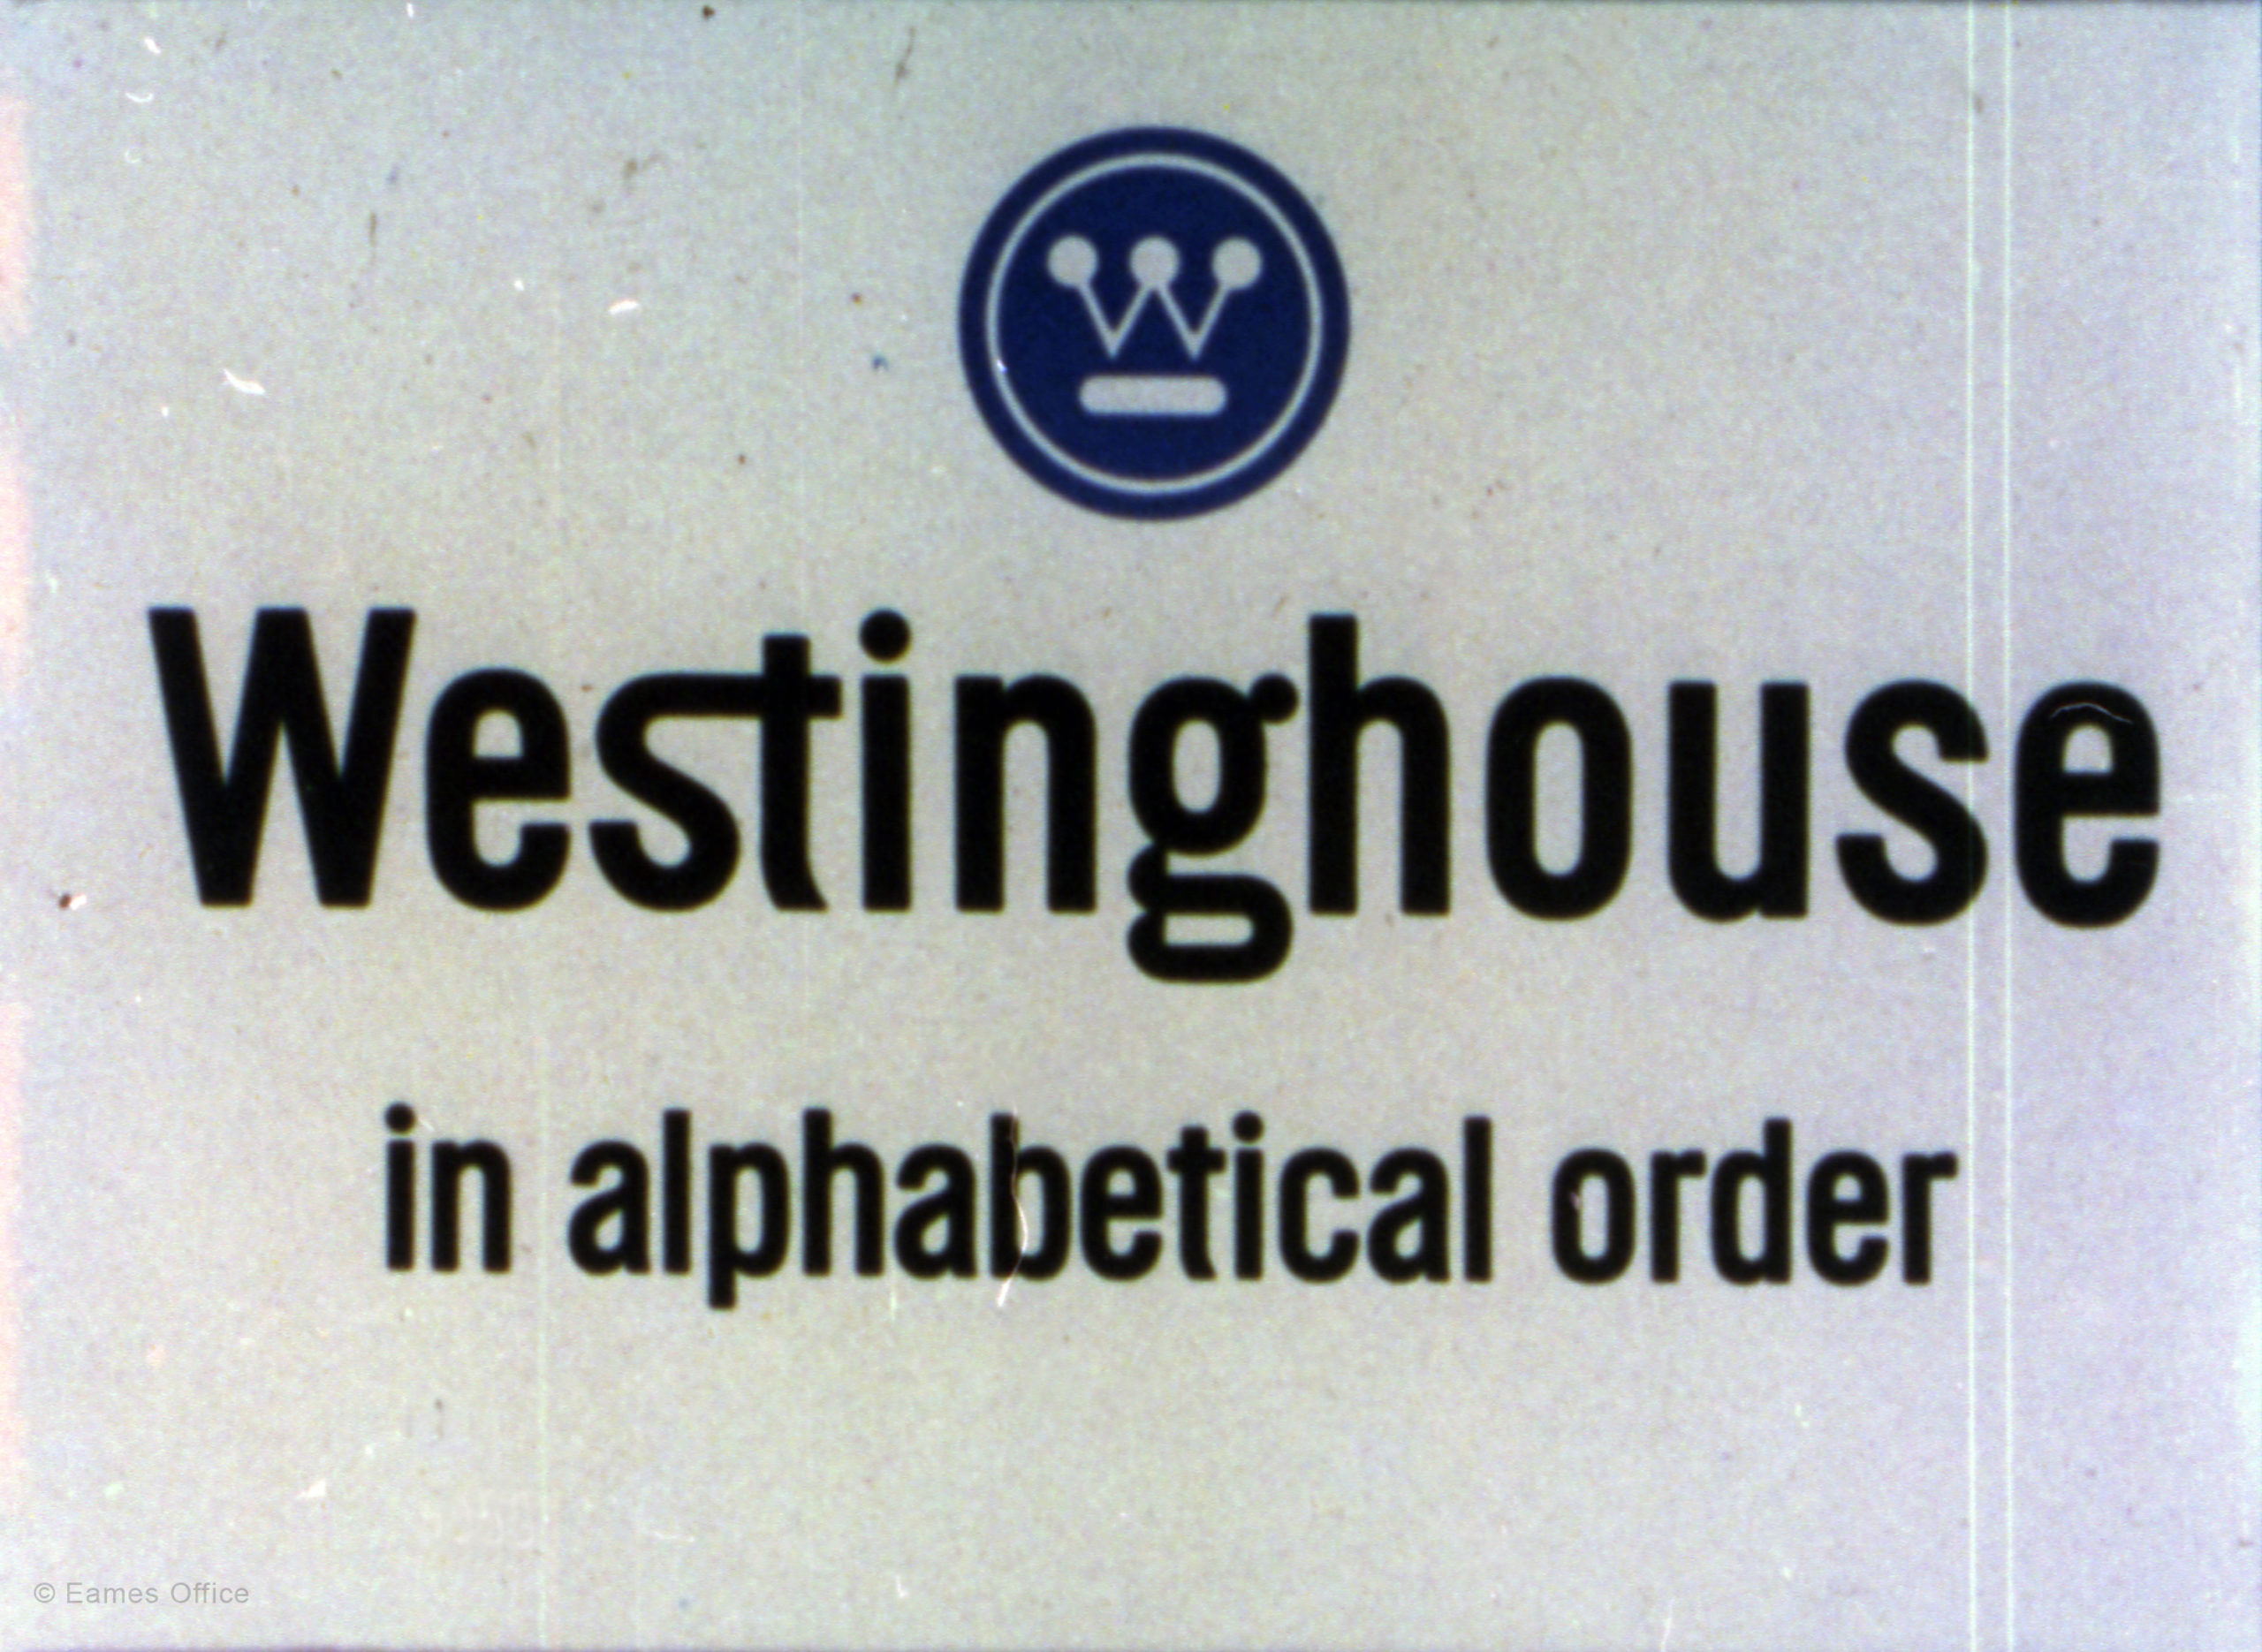 https://www.eamesoffice.com/wp-content/uploads/2021/07/Westinghouse-in-Alphabetical-Order-scaled.jpg